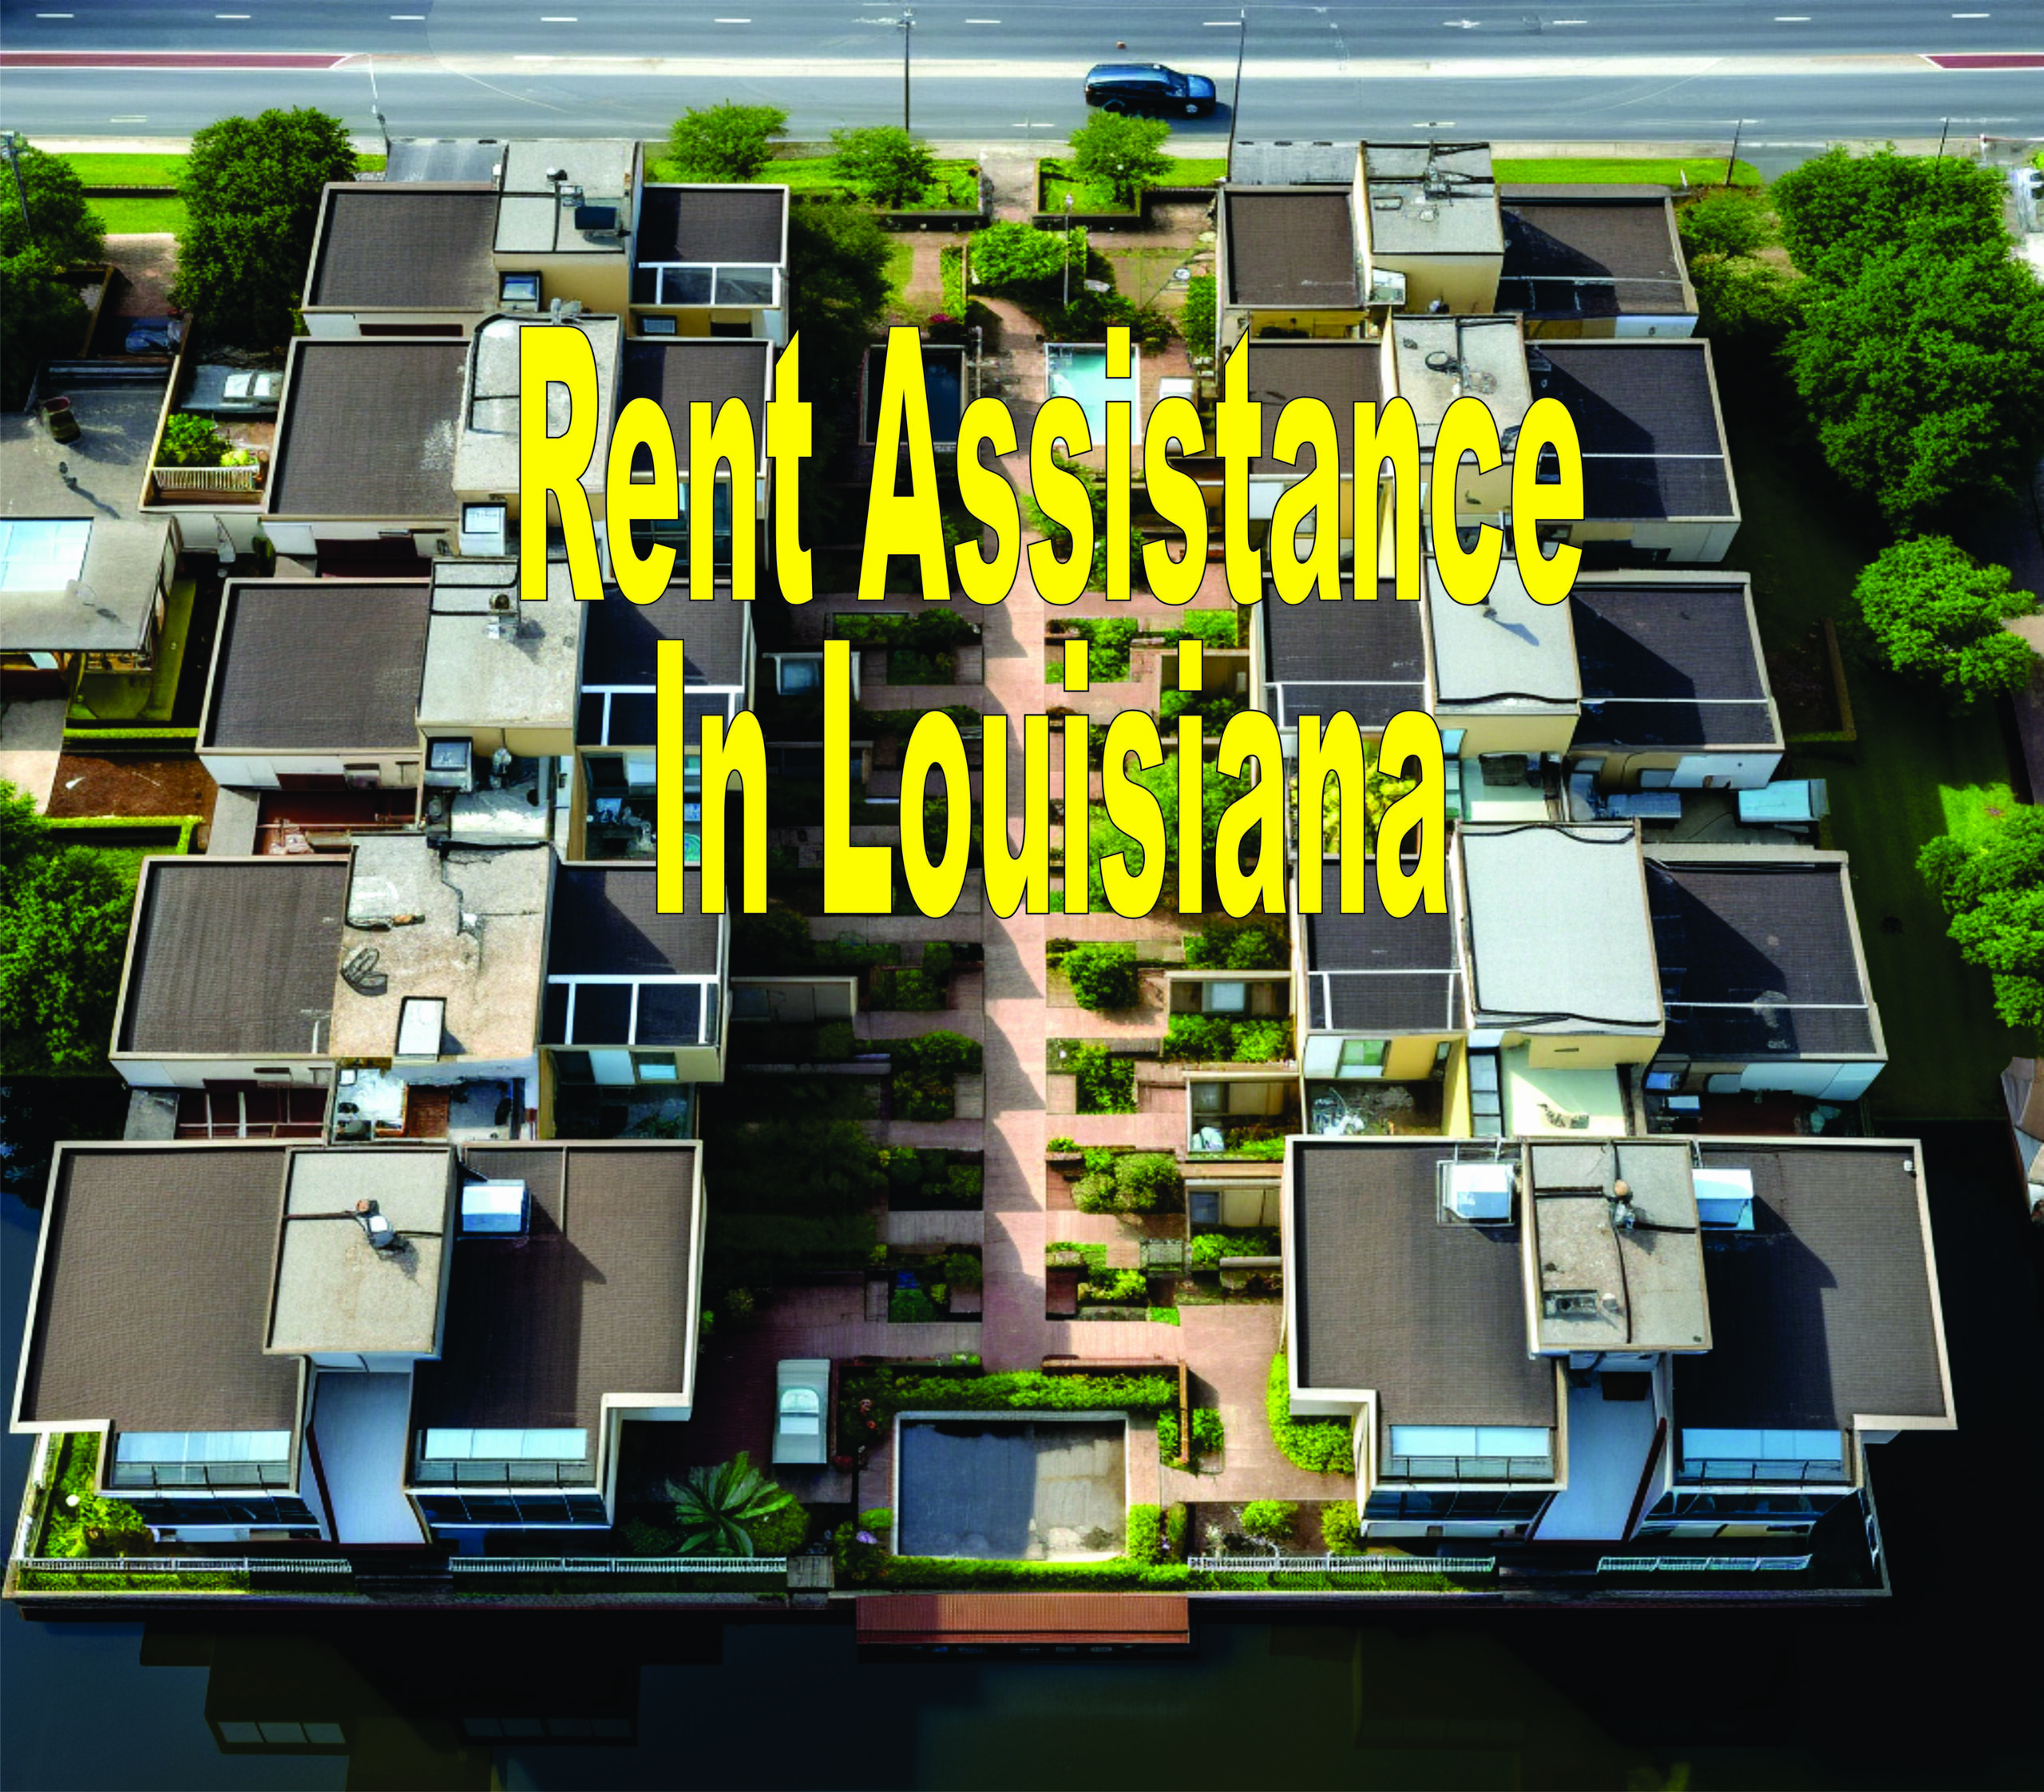 Rent Assistance In Louisiana